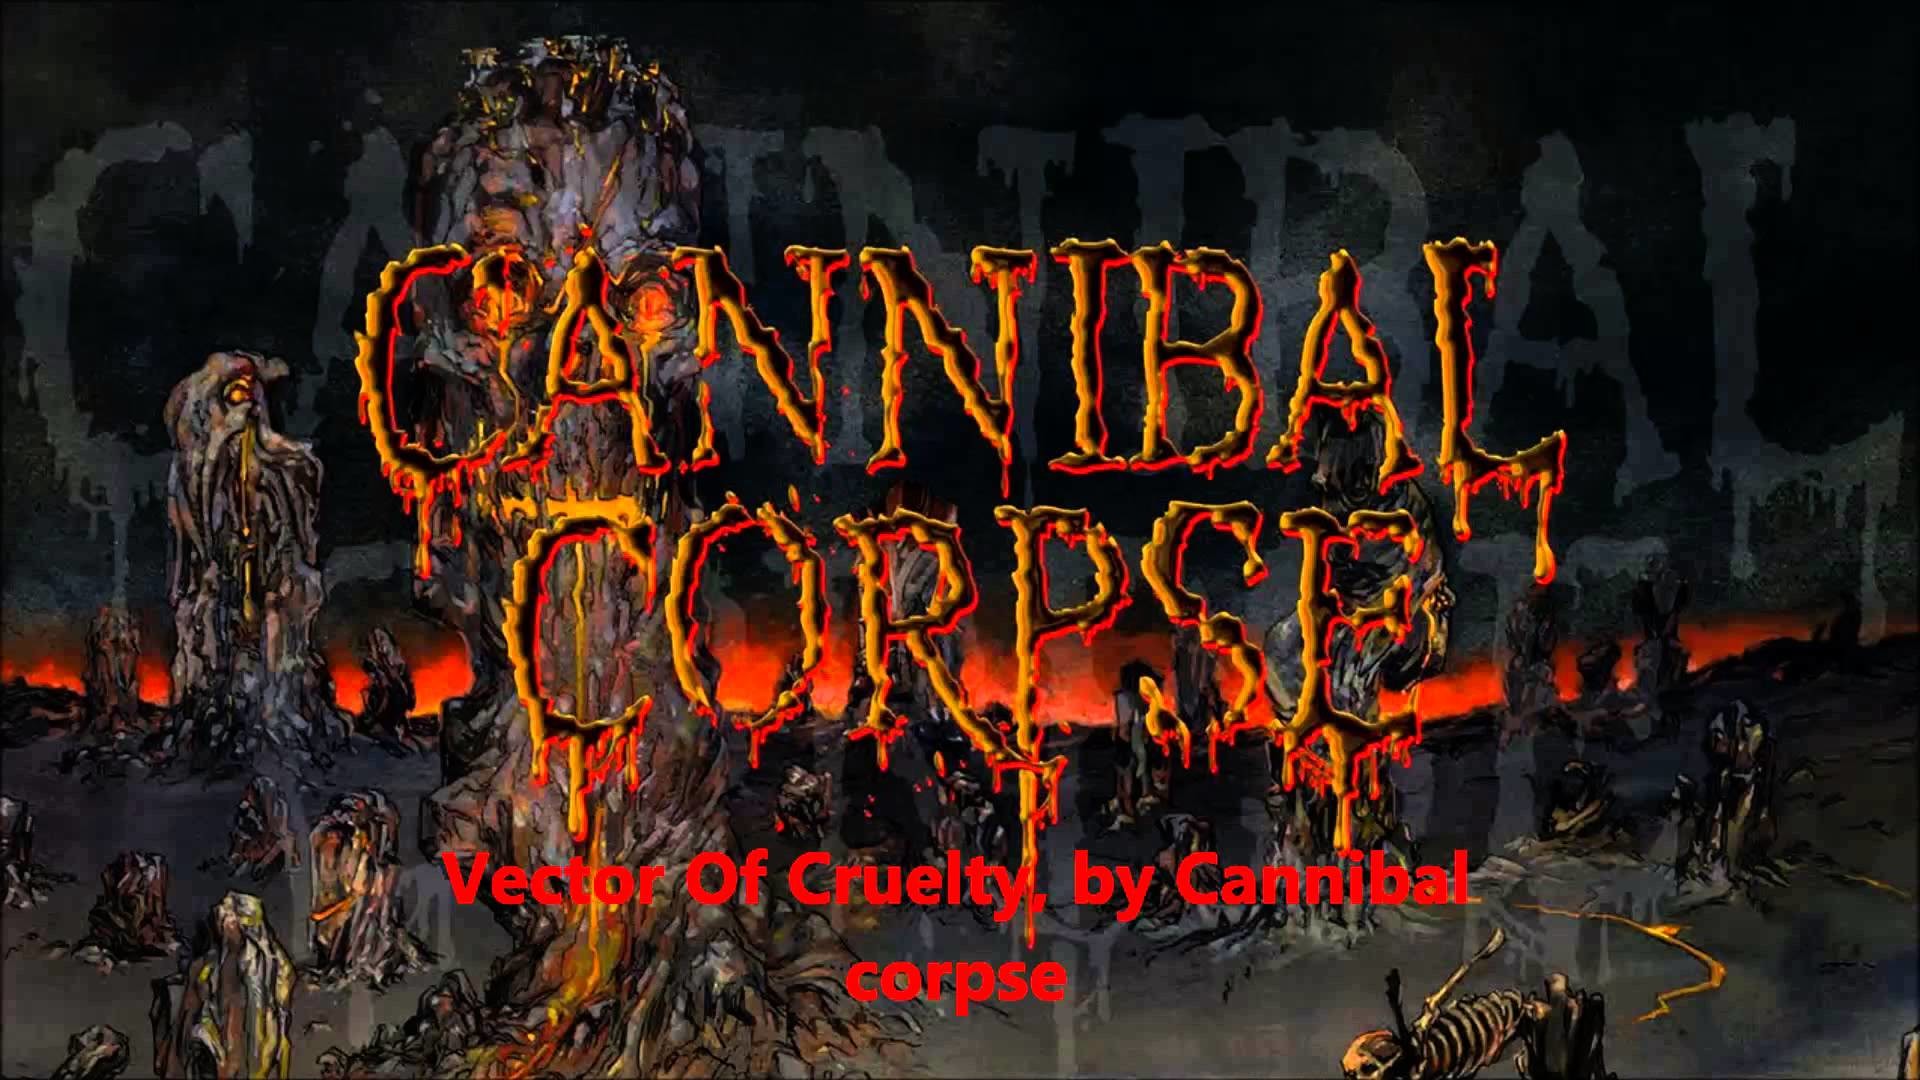 1920x1080 Cannibal Corpse Vector Of Cruelty, A skeletal Domain!